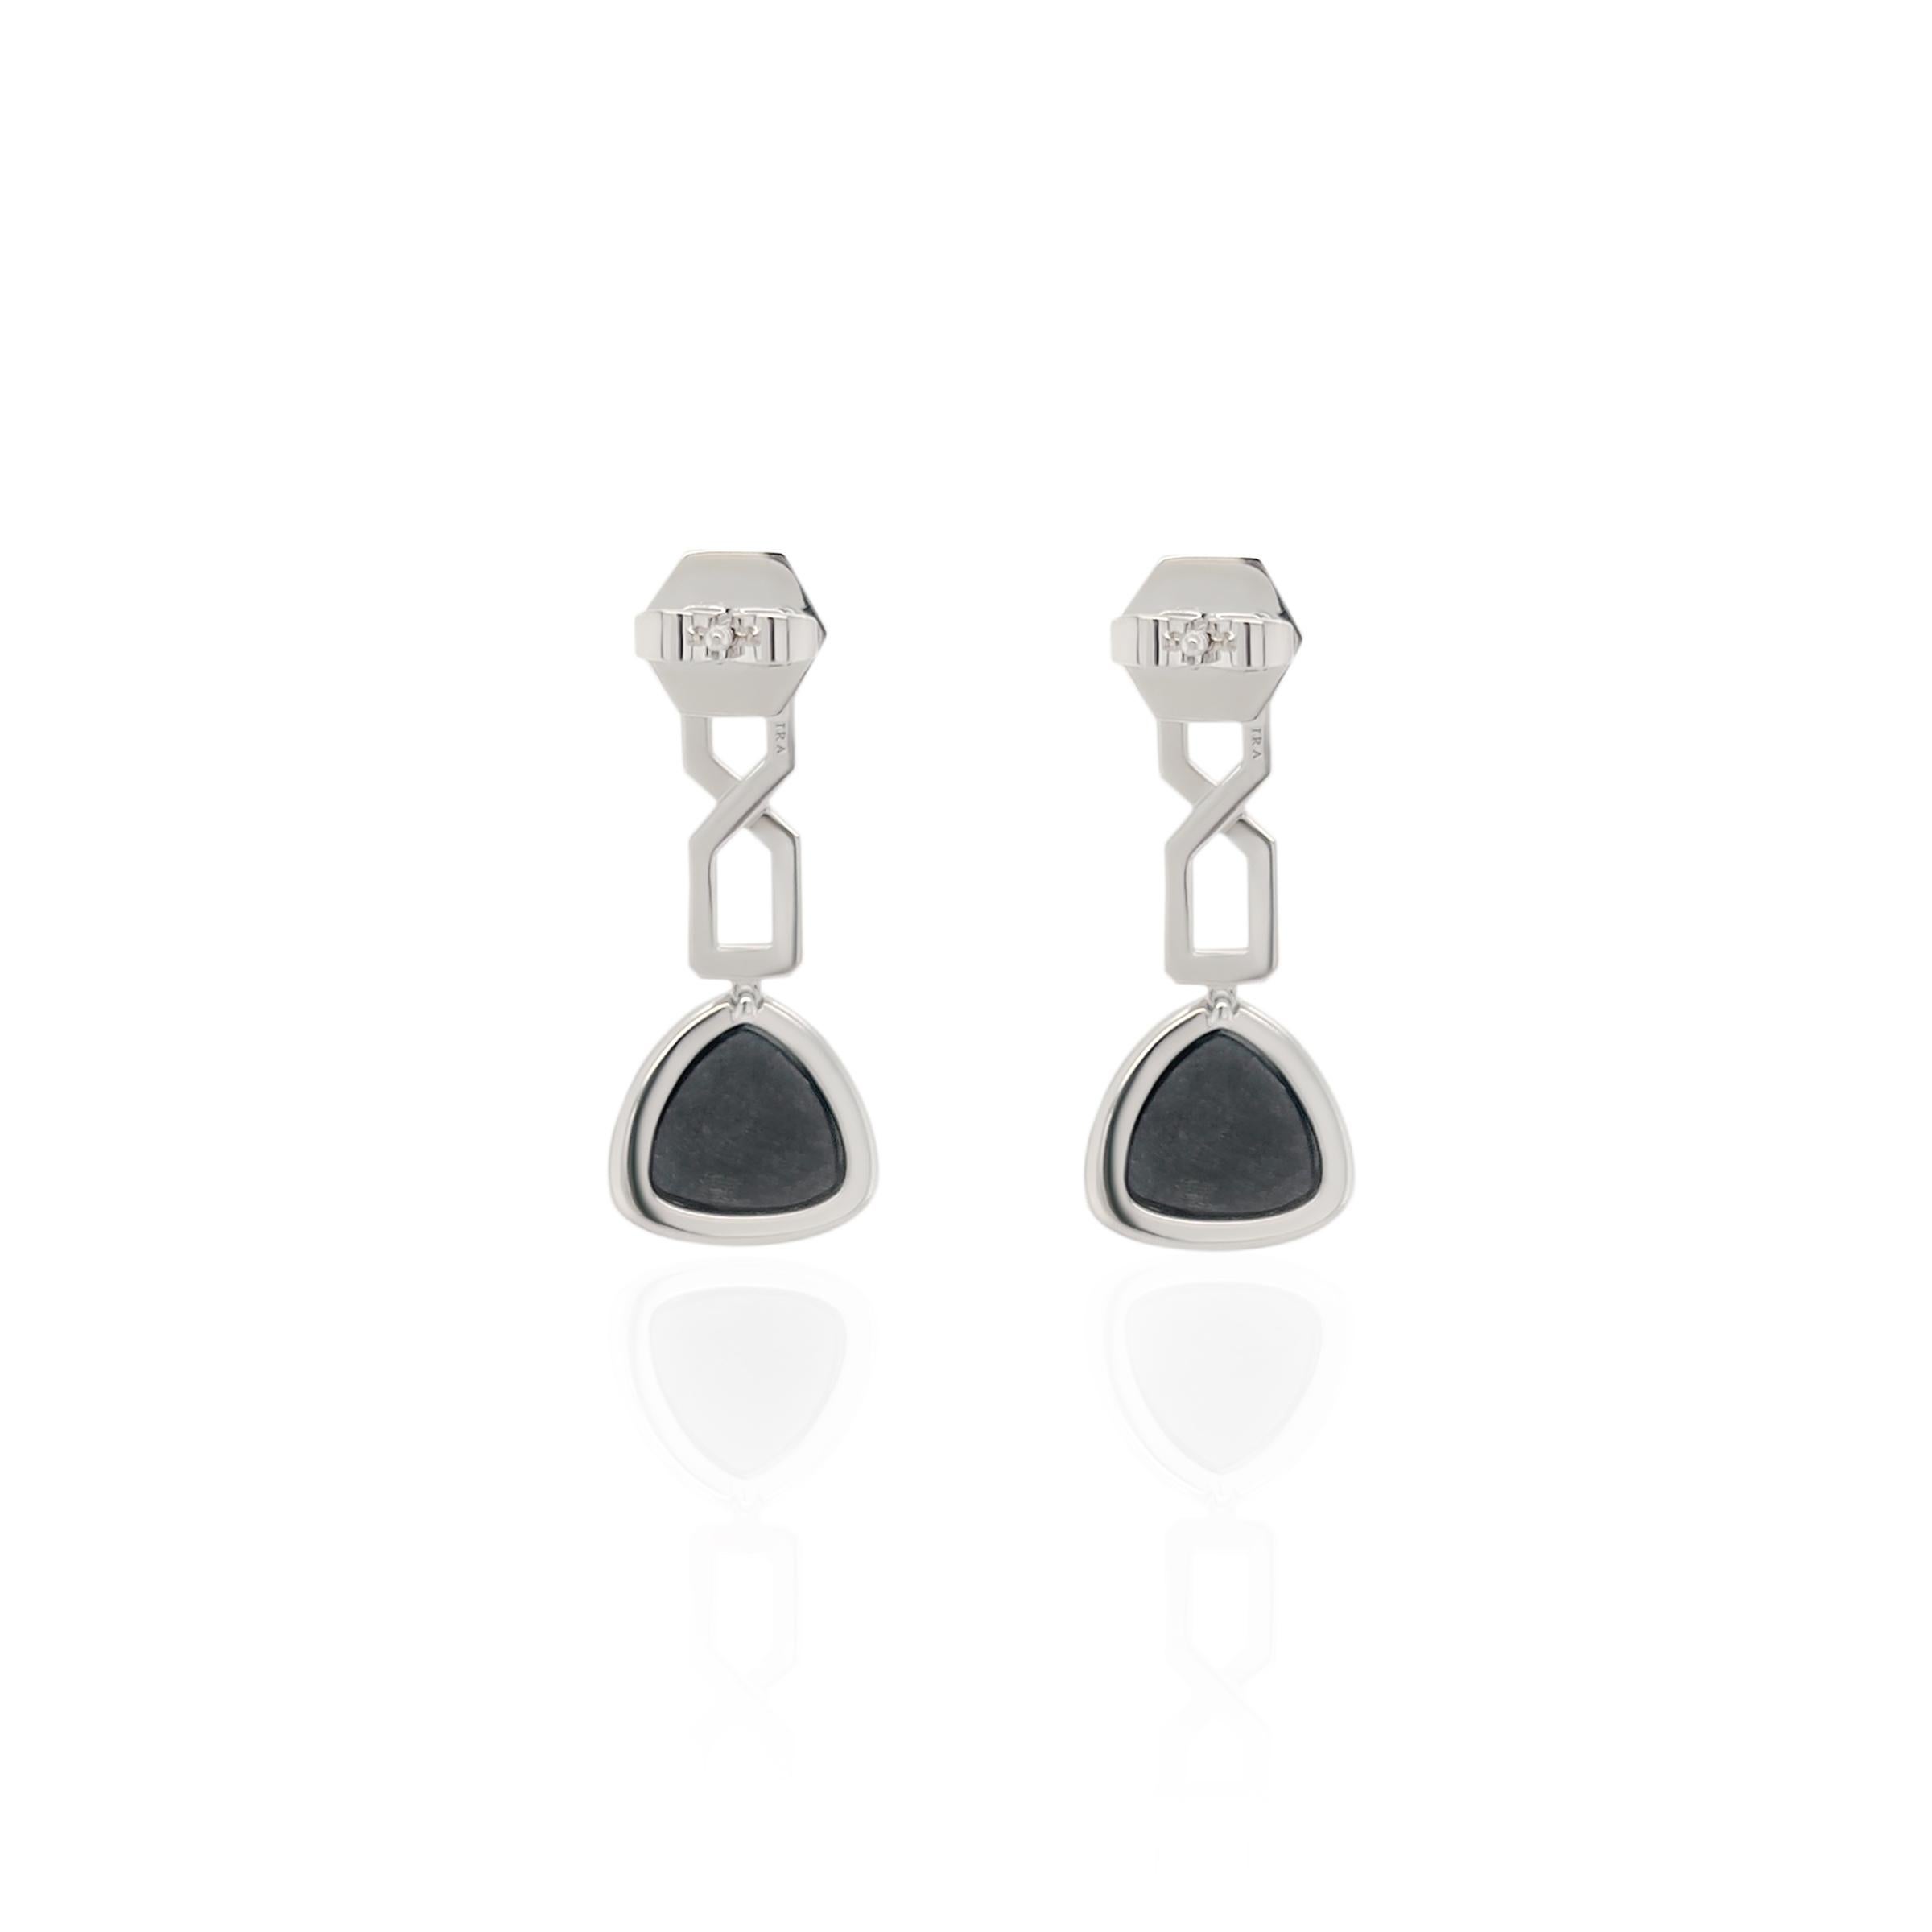 These exquisite 3.93ct trillion cut black onyx and white diamond earrings are stunning and perfect for any occasion. Crafted from 18k white gold and set with black onyx and white diamonds these earrings exude timeless elegance. The faceted black